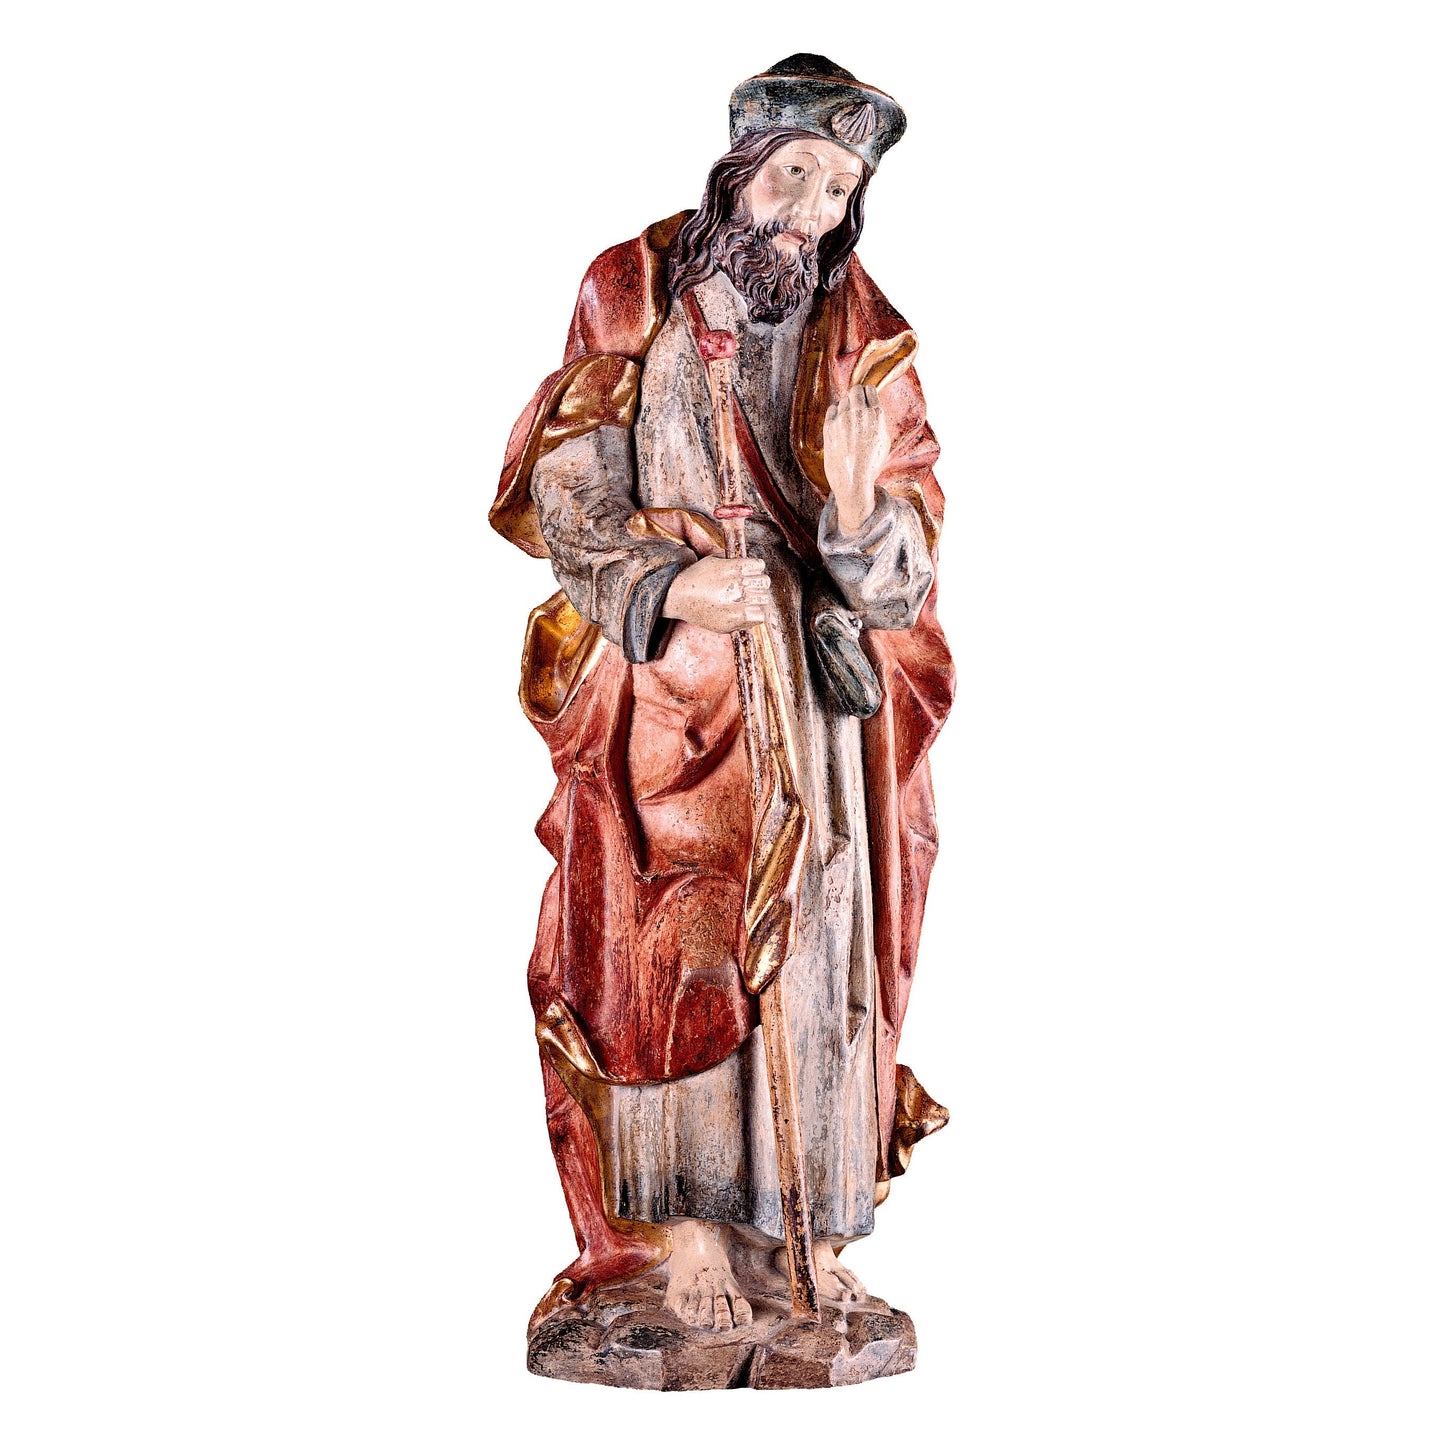 MONDO CATTOLICO Golden / 40 cm (15.7 in) Wooden statue of St. Jacob